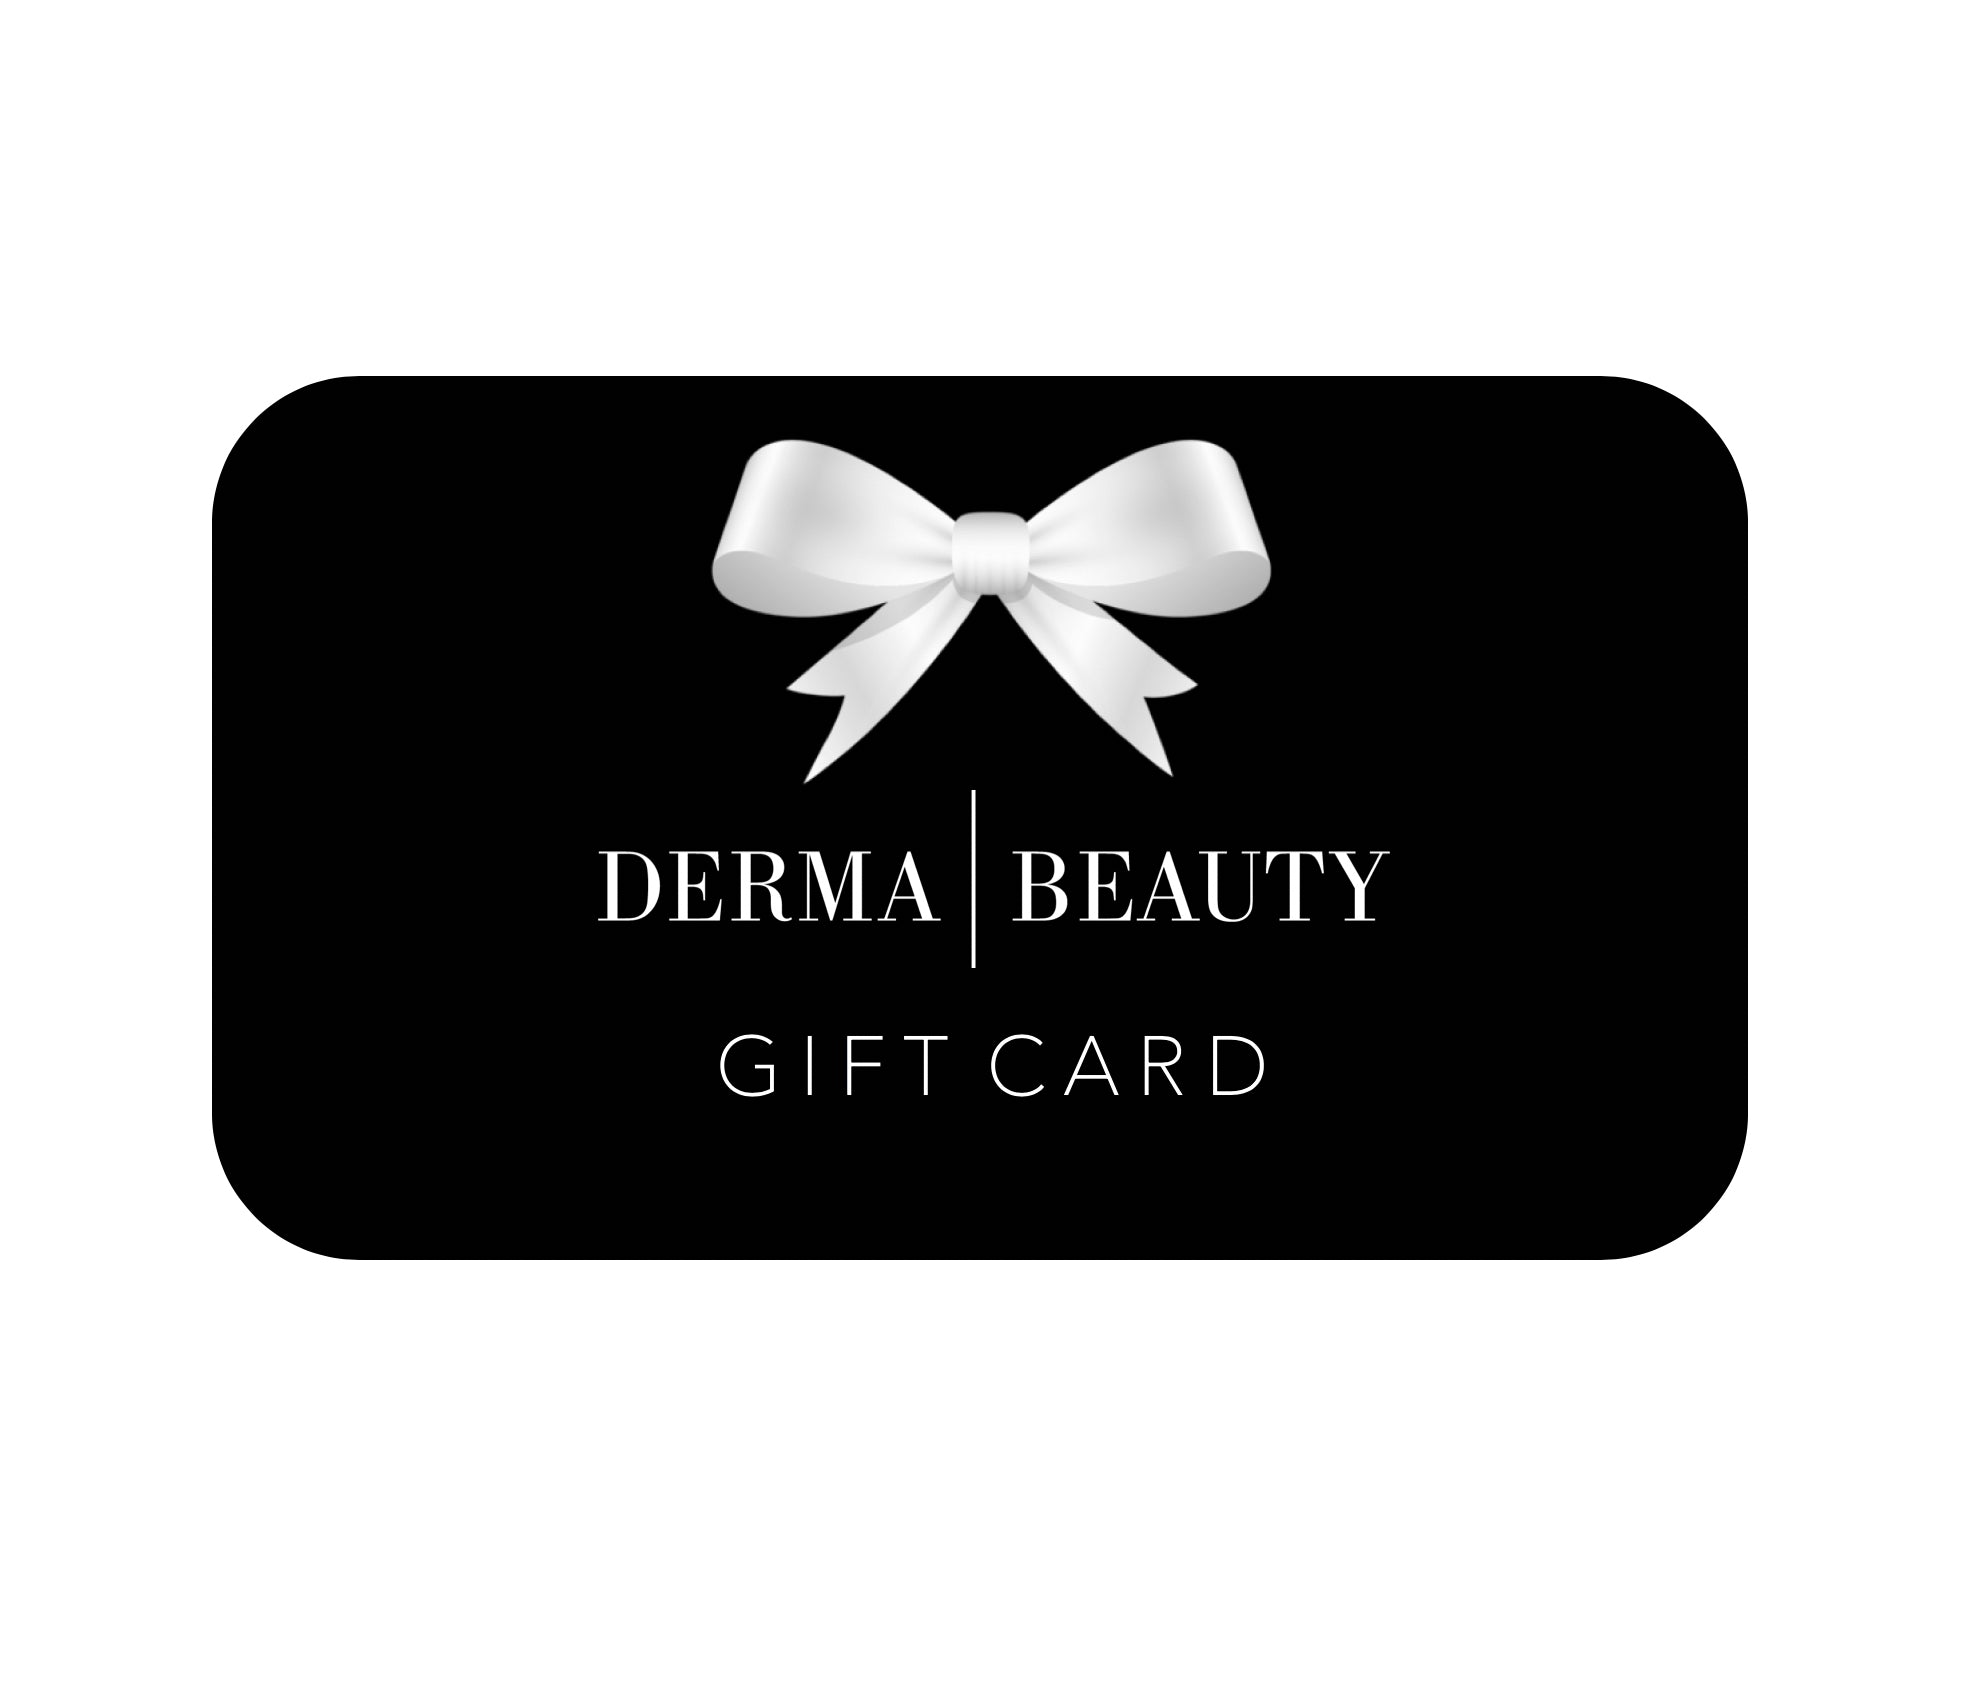 Derma Beauty Gift Card - Give the Gift of Beauty and Skincare Essentials